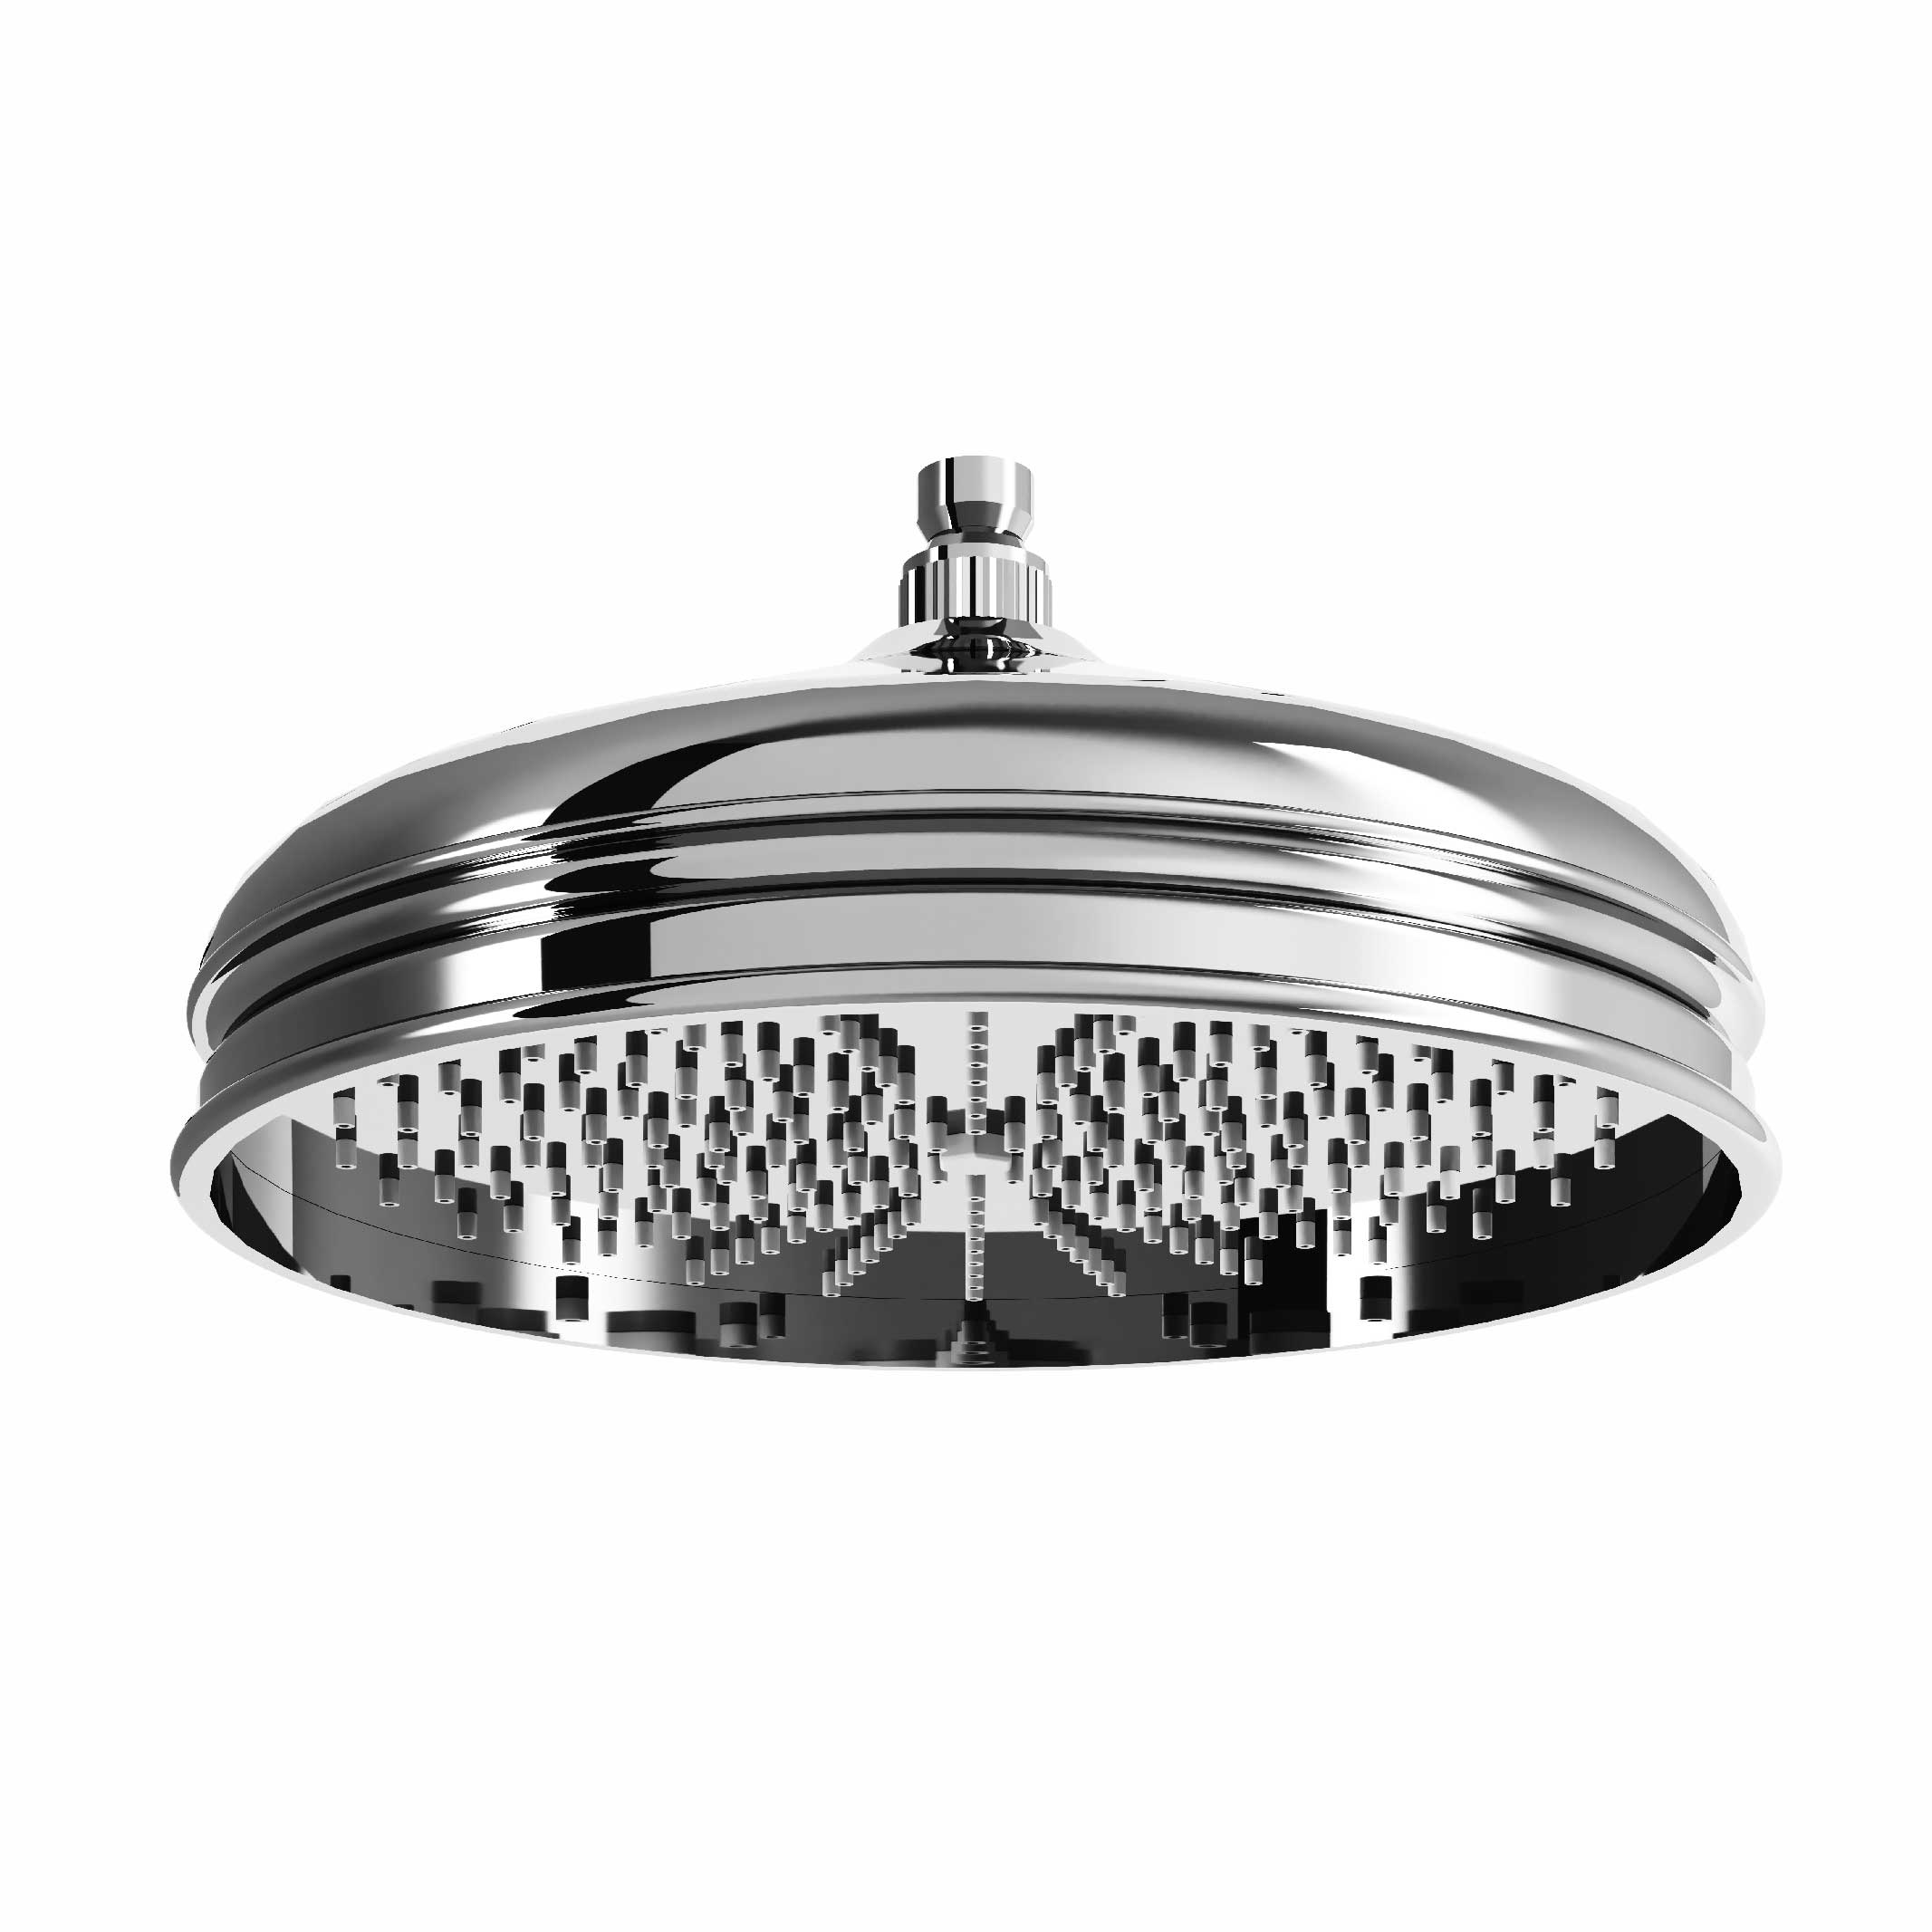 S00-2424 “Traditional” headshower anti-scale